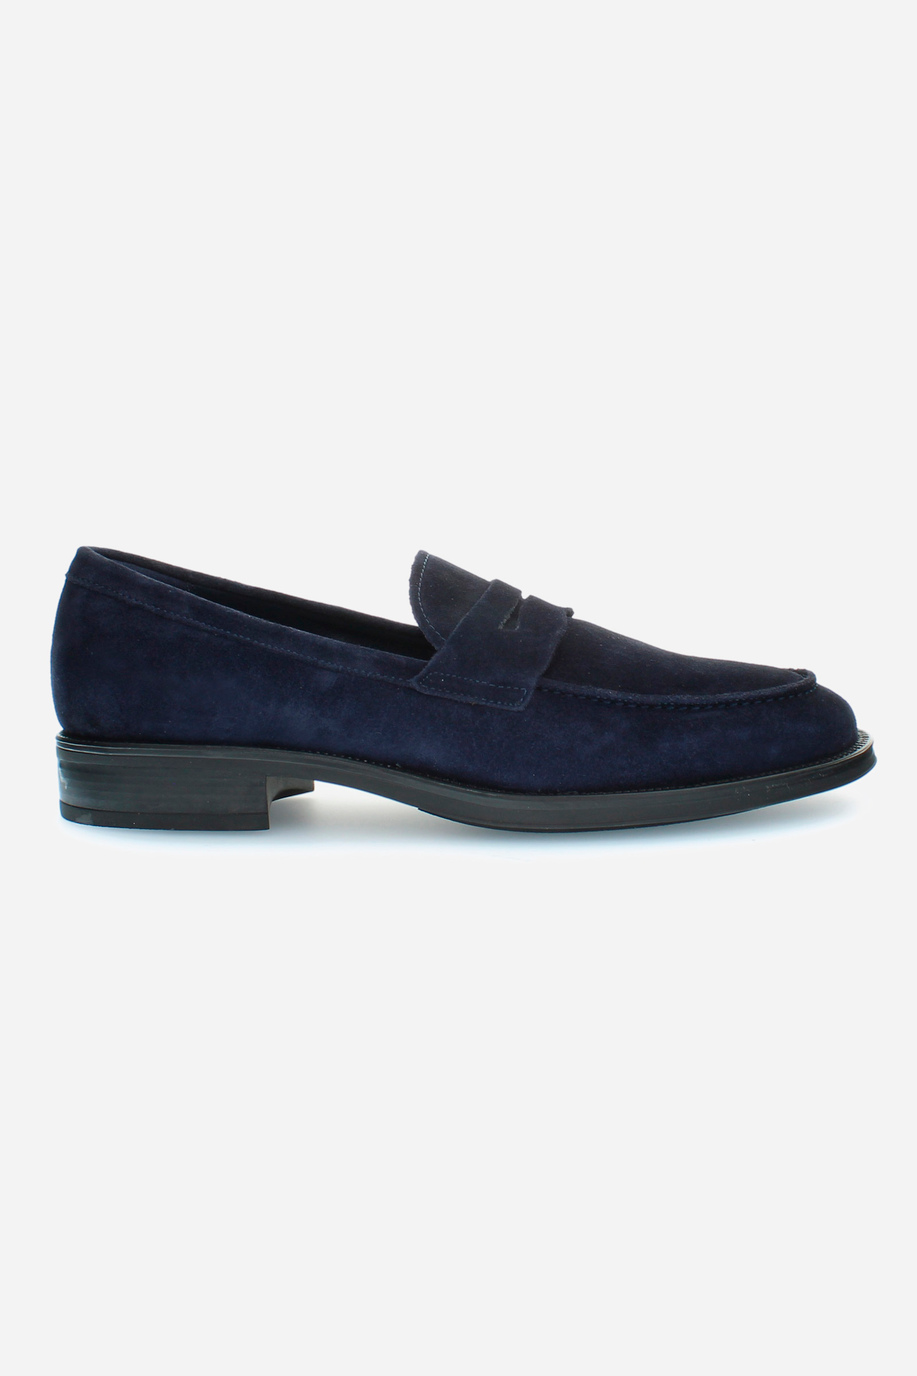 Men's college loafers in leather - Footwear | La Martina - Official Online Shop